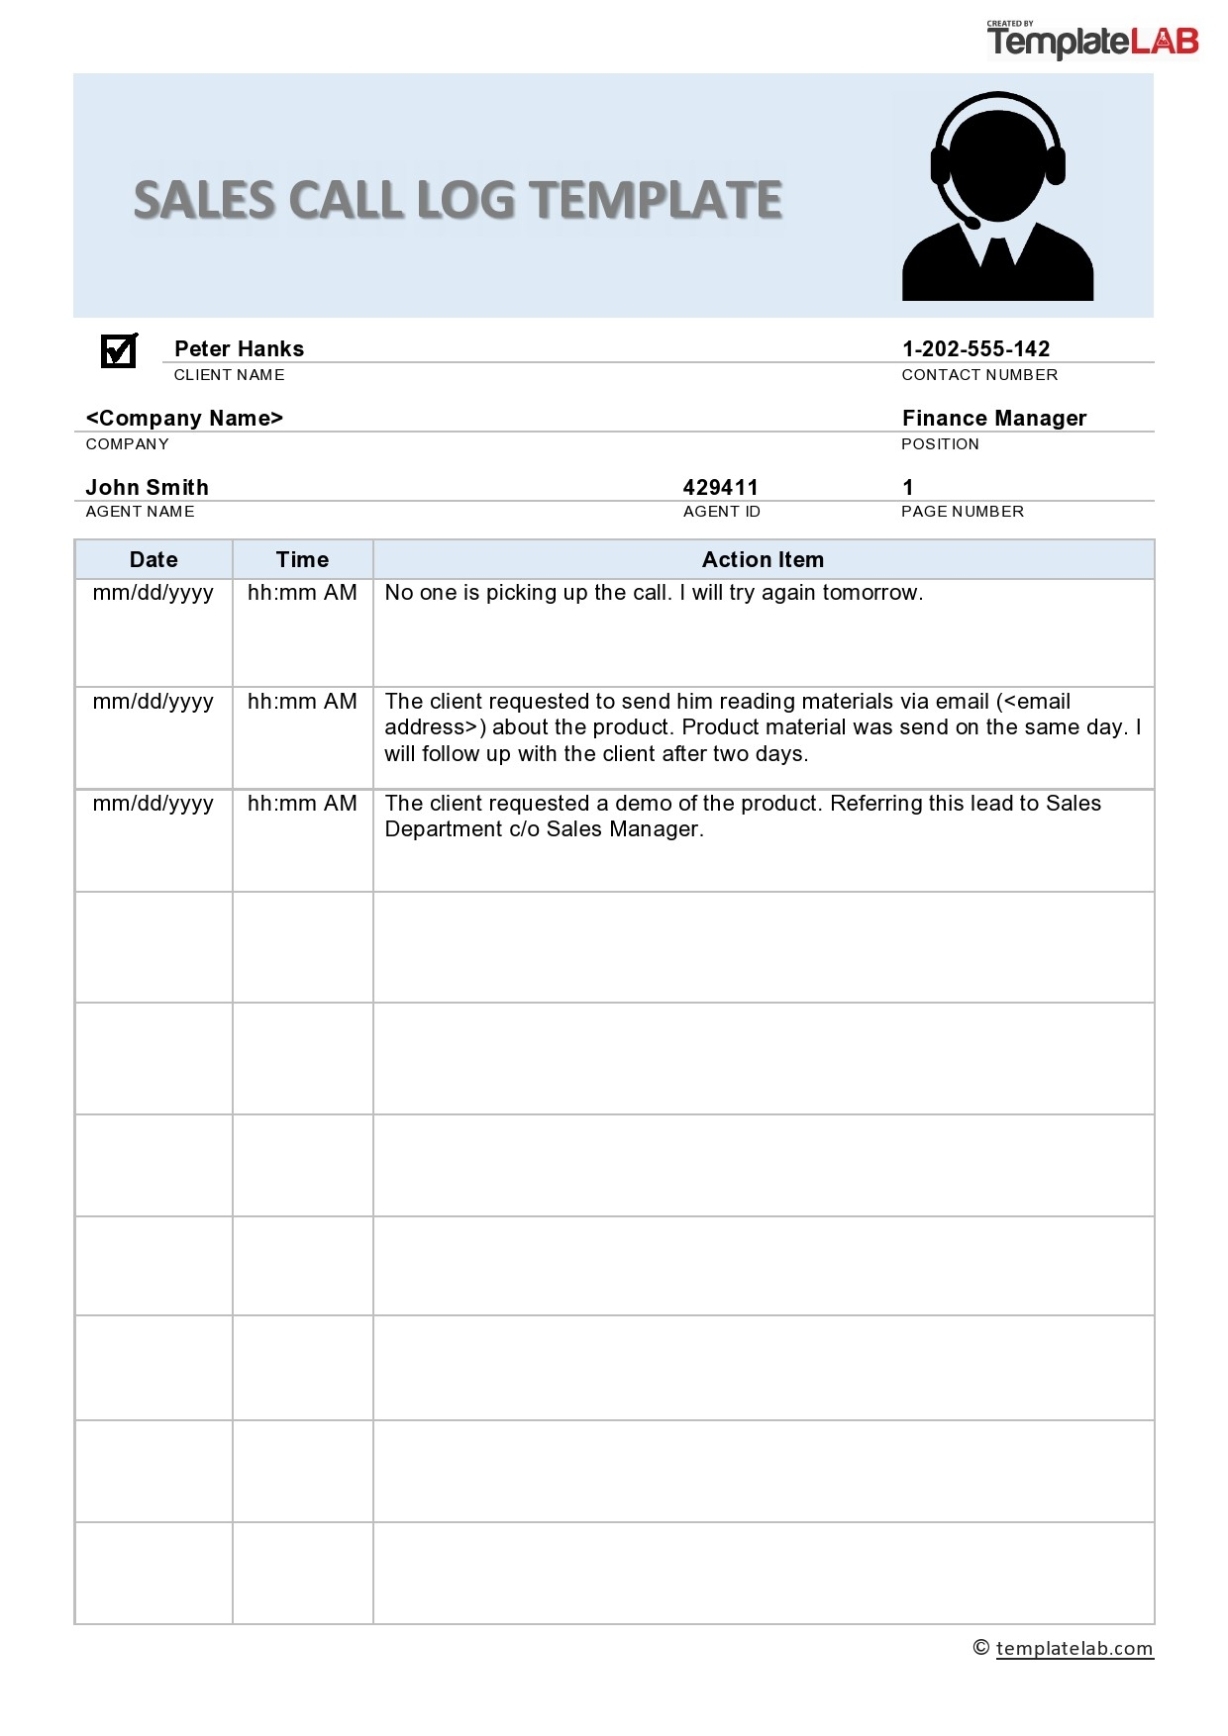 Free Sales Call Report Template - Printable Form, Templates And Letter regarding Sales Call Report Template Free